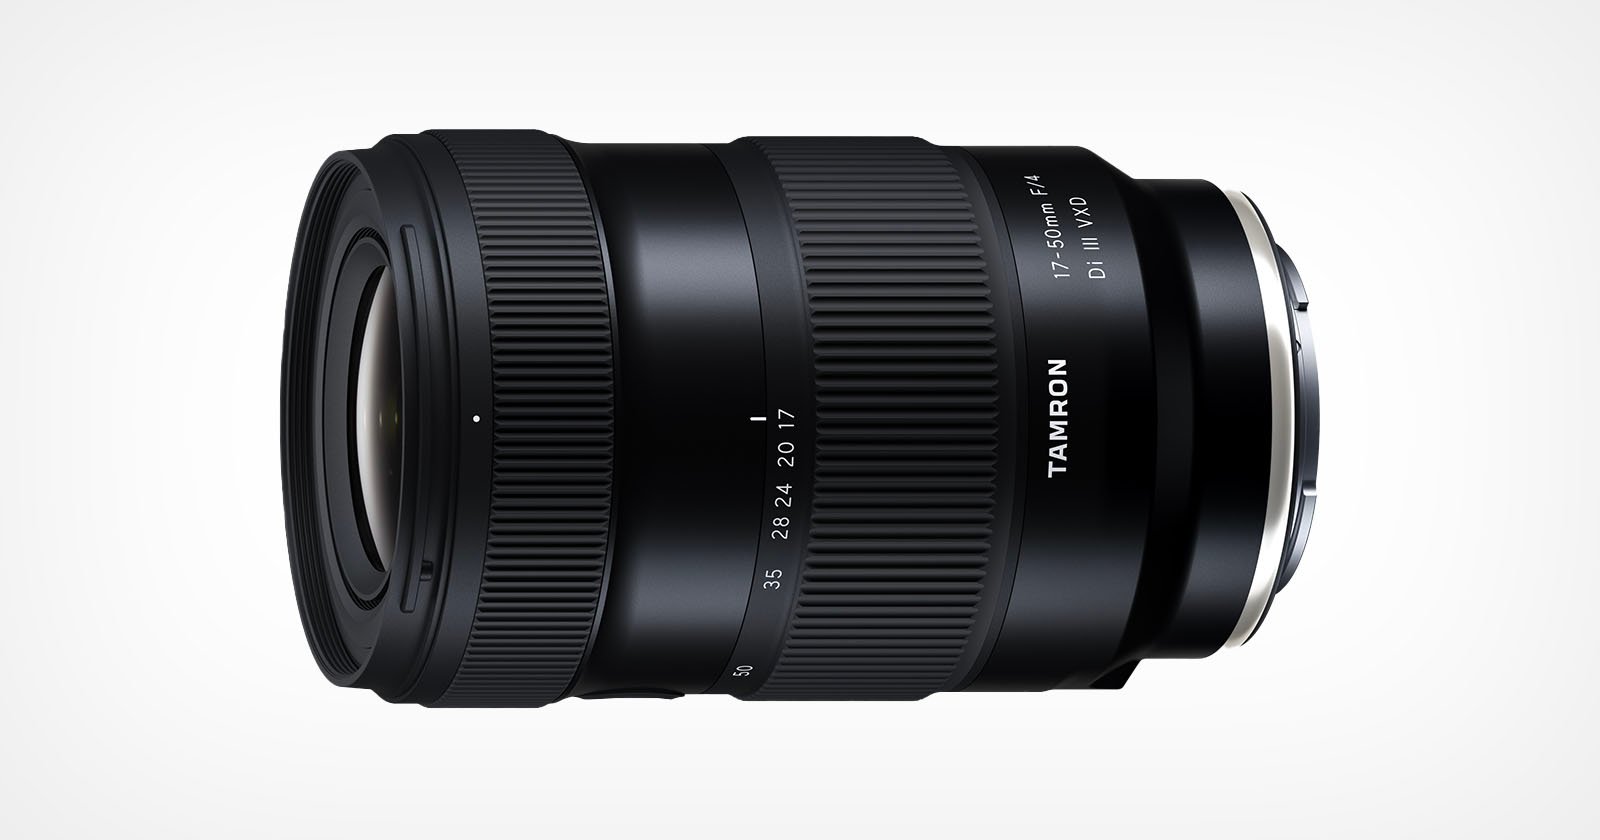 Tamron is Making a New, Worlds First 17-50mm f/4 for Sony E-Mount